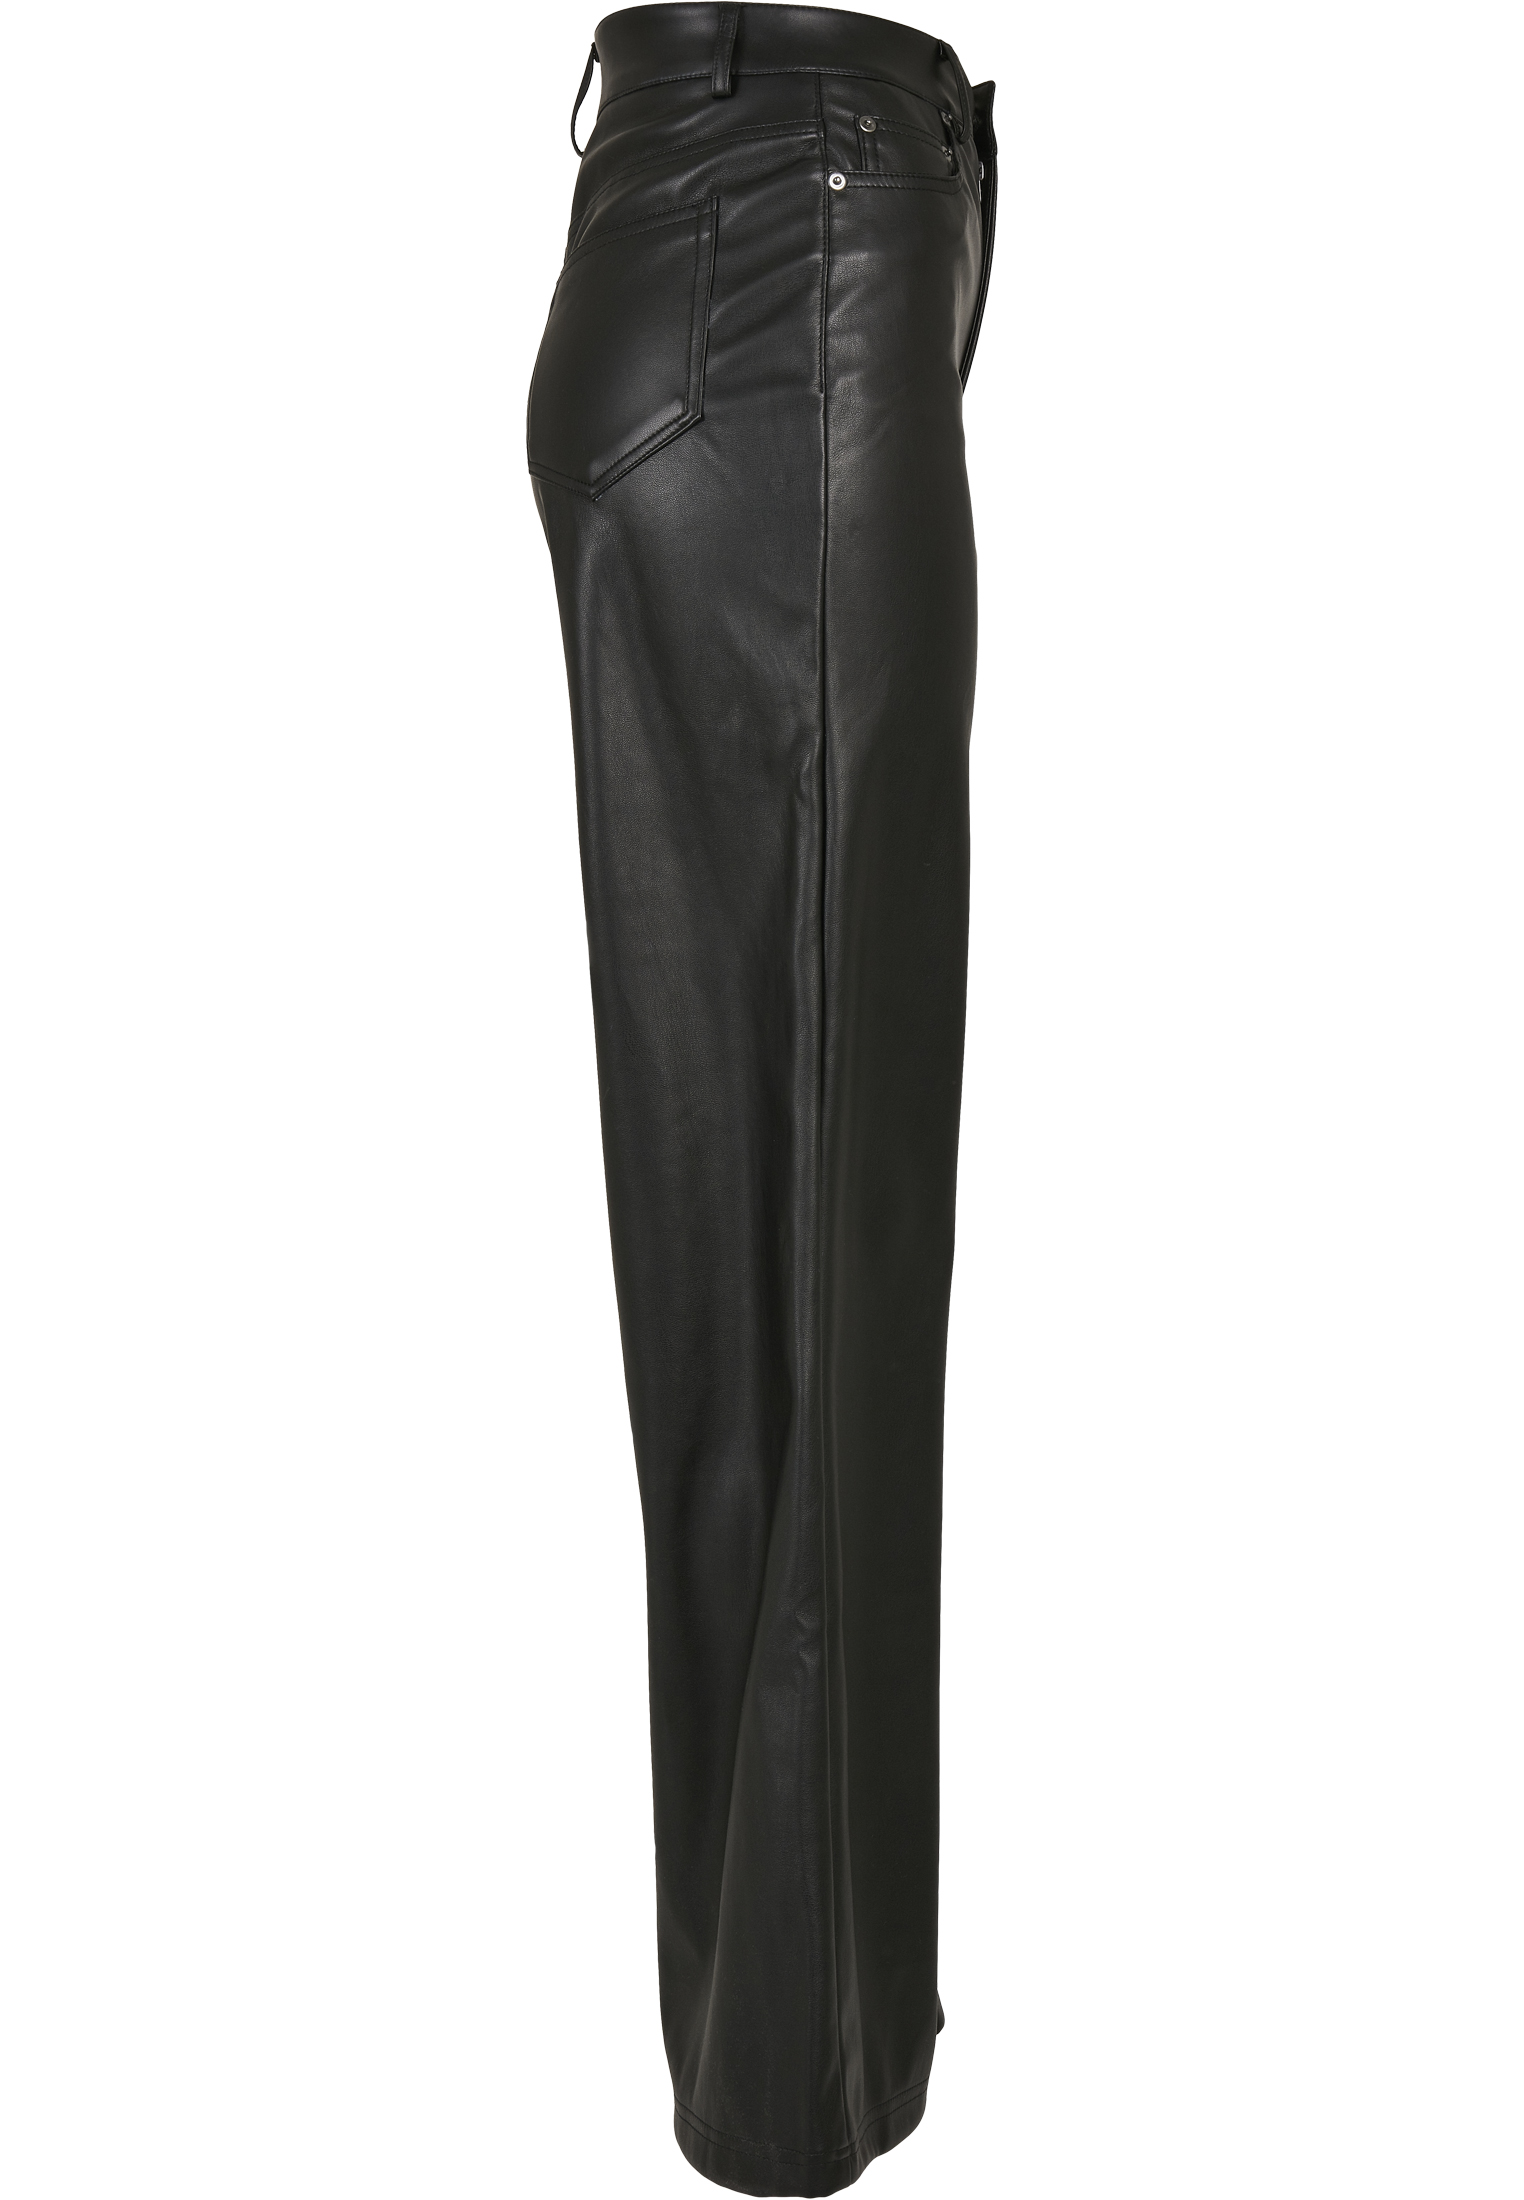 Best Faux Leather Trousers For Women 2021  The Sun  The Sun